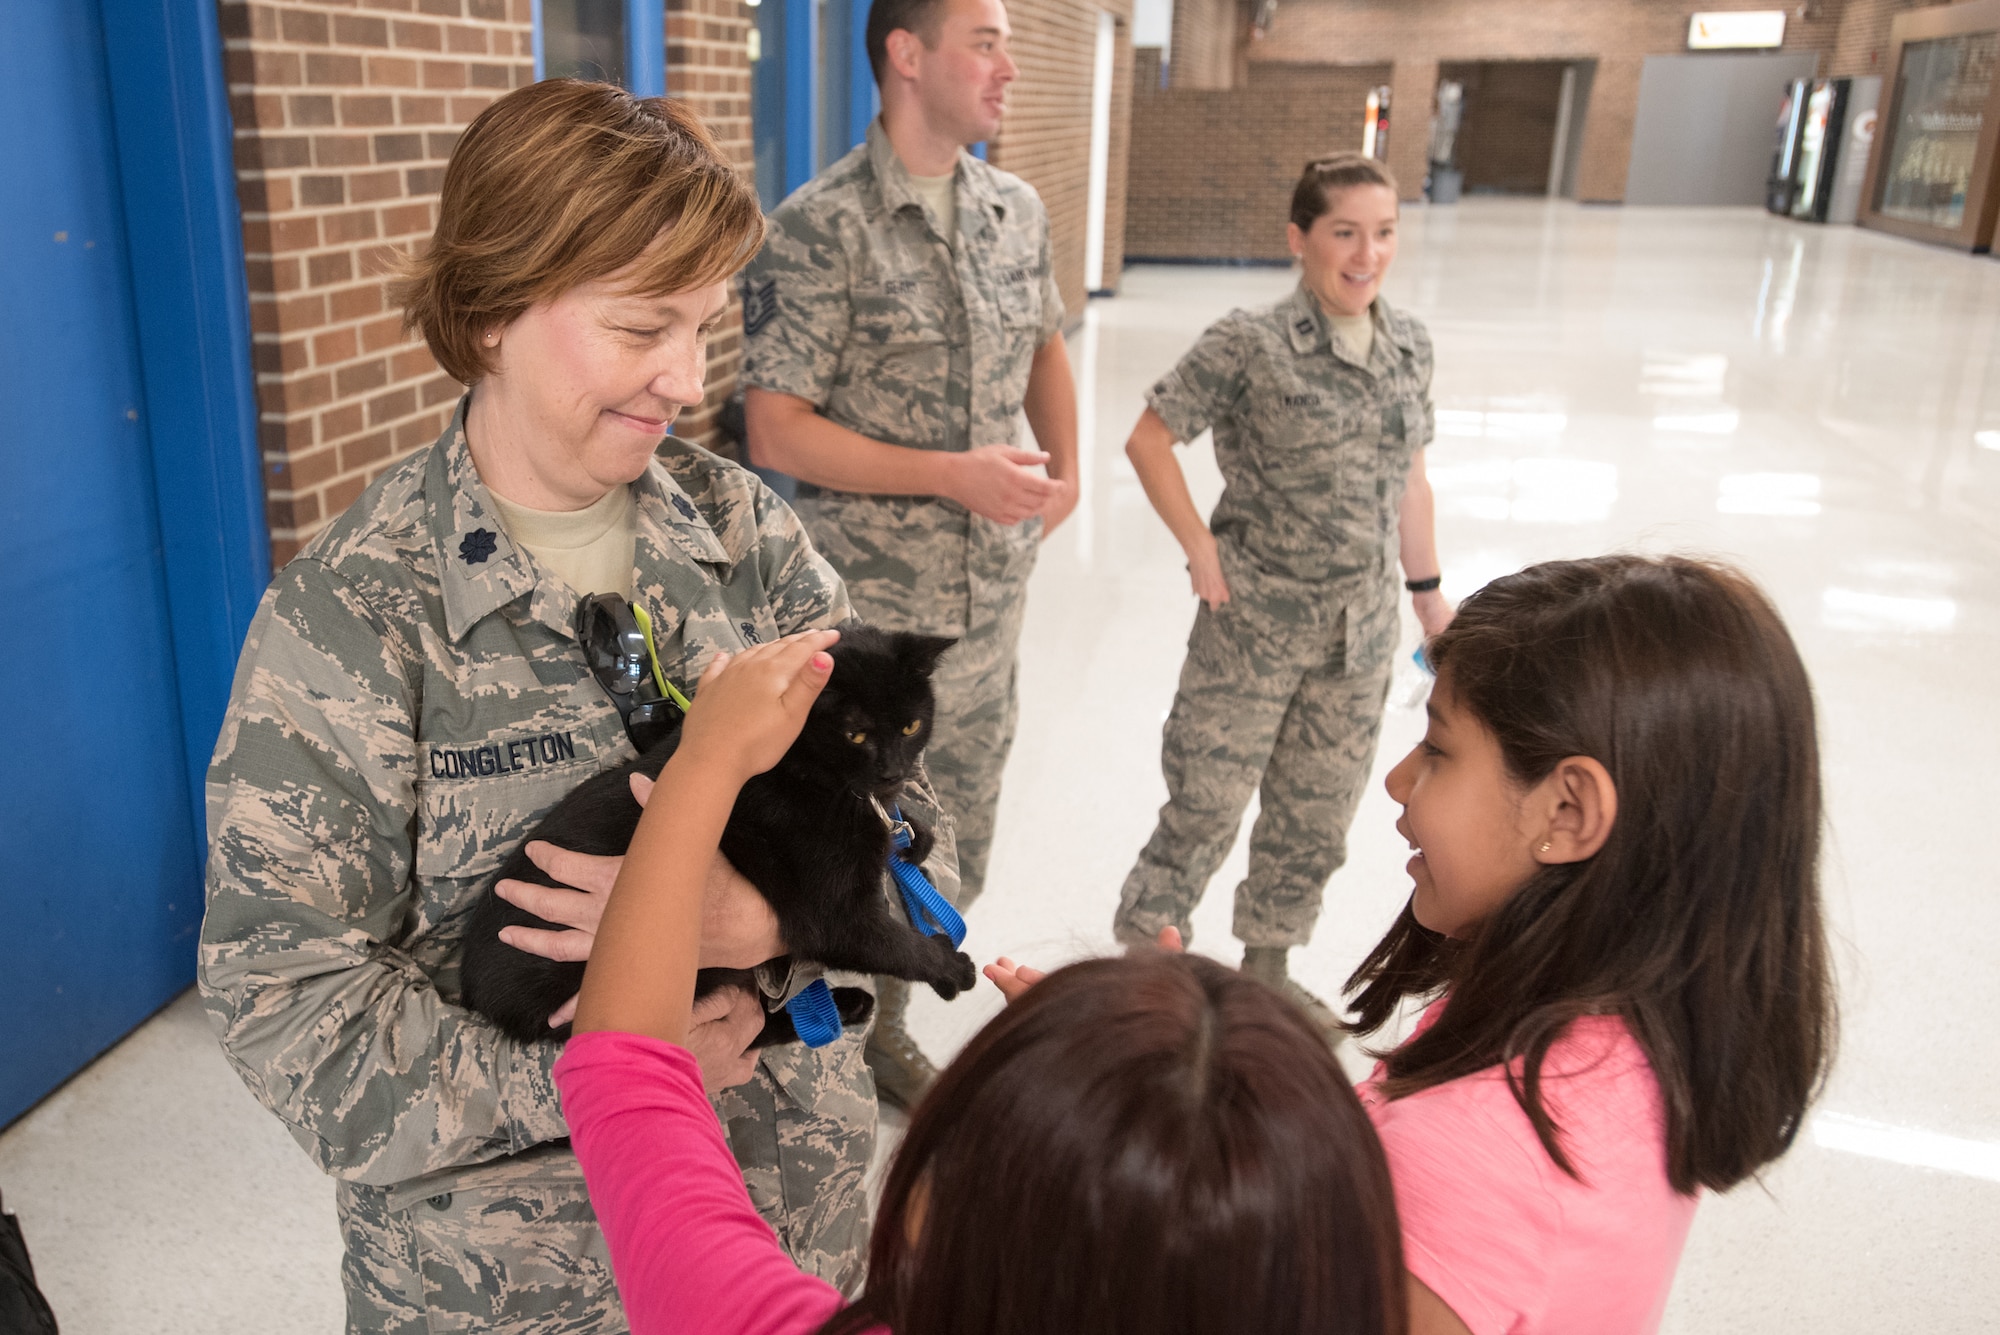 Lt. Col. Carolyn Congleton (left), chief of public health from the Kentucky Air National Guard’s 123rd Medical Group, holds a kitten from the Mayfield-Graves County Animal Shelter at Graves County High School in Mayfield, Ky., on July 26, 2016, during Bluegrass Medical Innovative Readiness Training. Congleton conducted a free pet safety seminar to residents of Western Kentucky as part of the IRT.  The Kentucky Air National Guard, U.S. Navy Reserve and other military units are teaming with the Delta Regional Authority to offer medical and dental care at no cost to residents in Mayfield and two other Western Kentucky locations from July 18 to 27 as part of the training event. (U.S. Air National Guard photo by Master Sgt. Phil Speck)